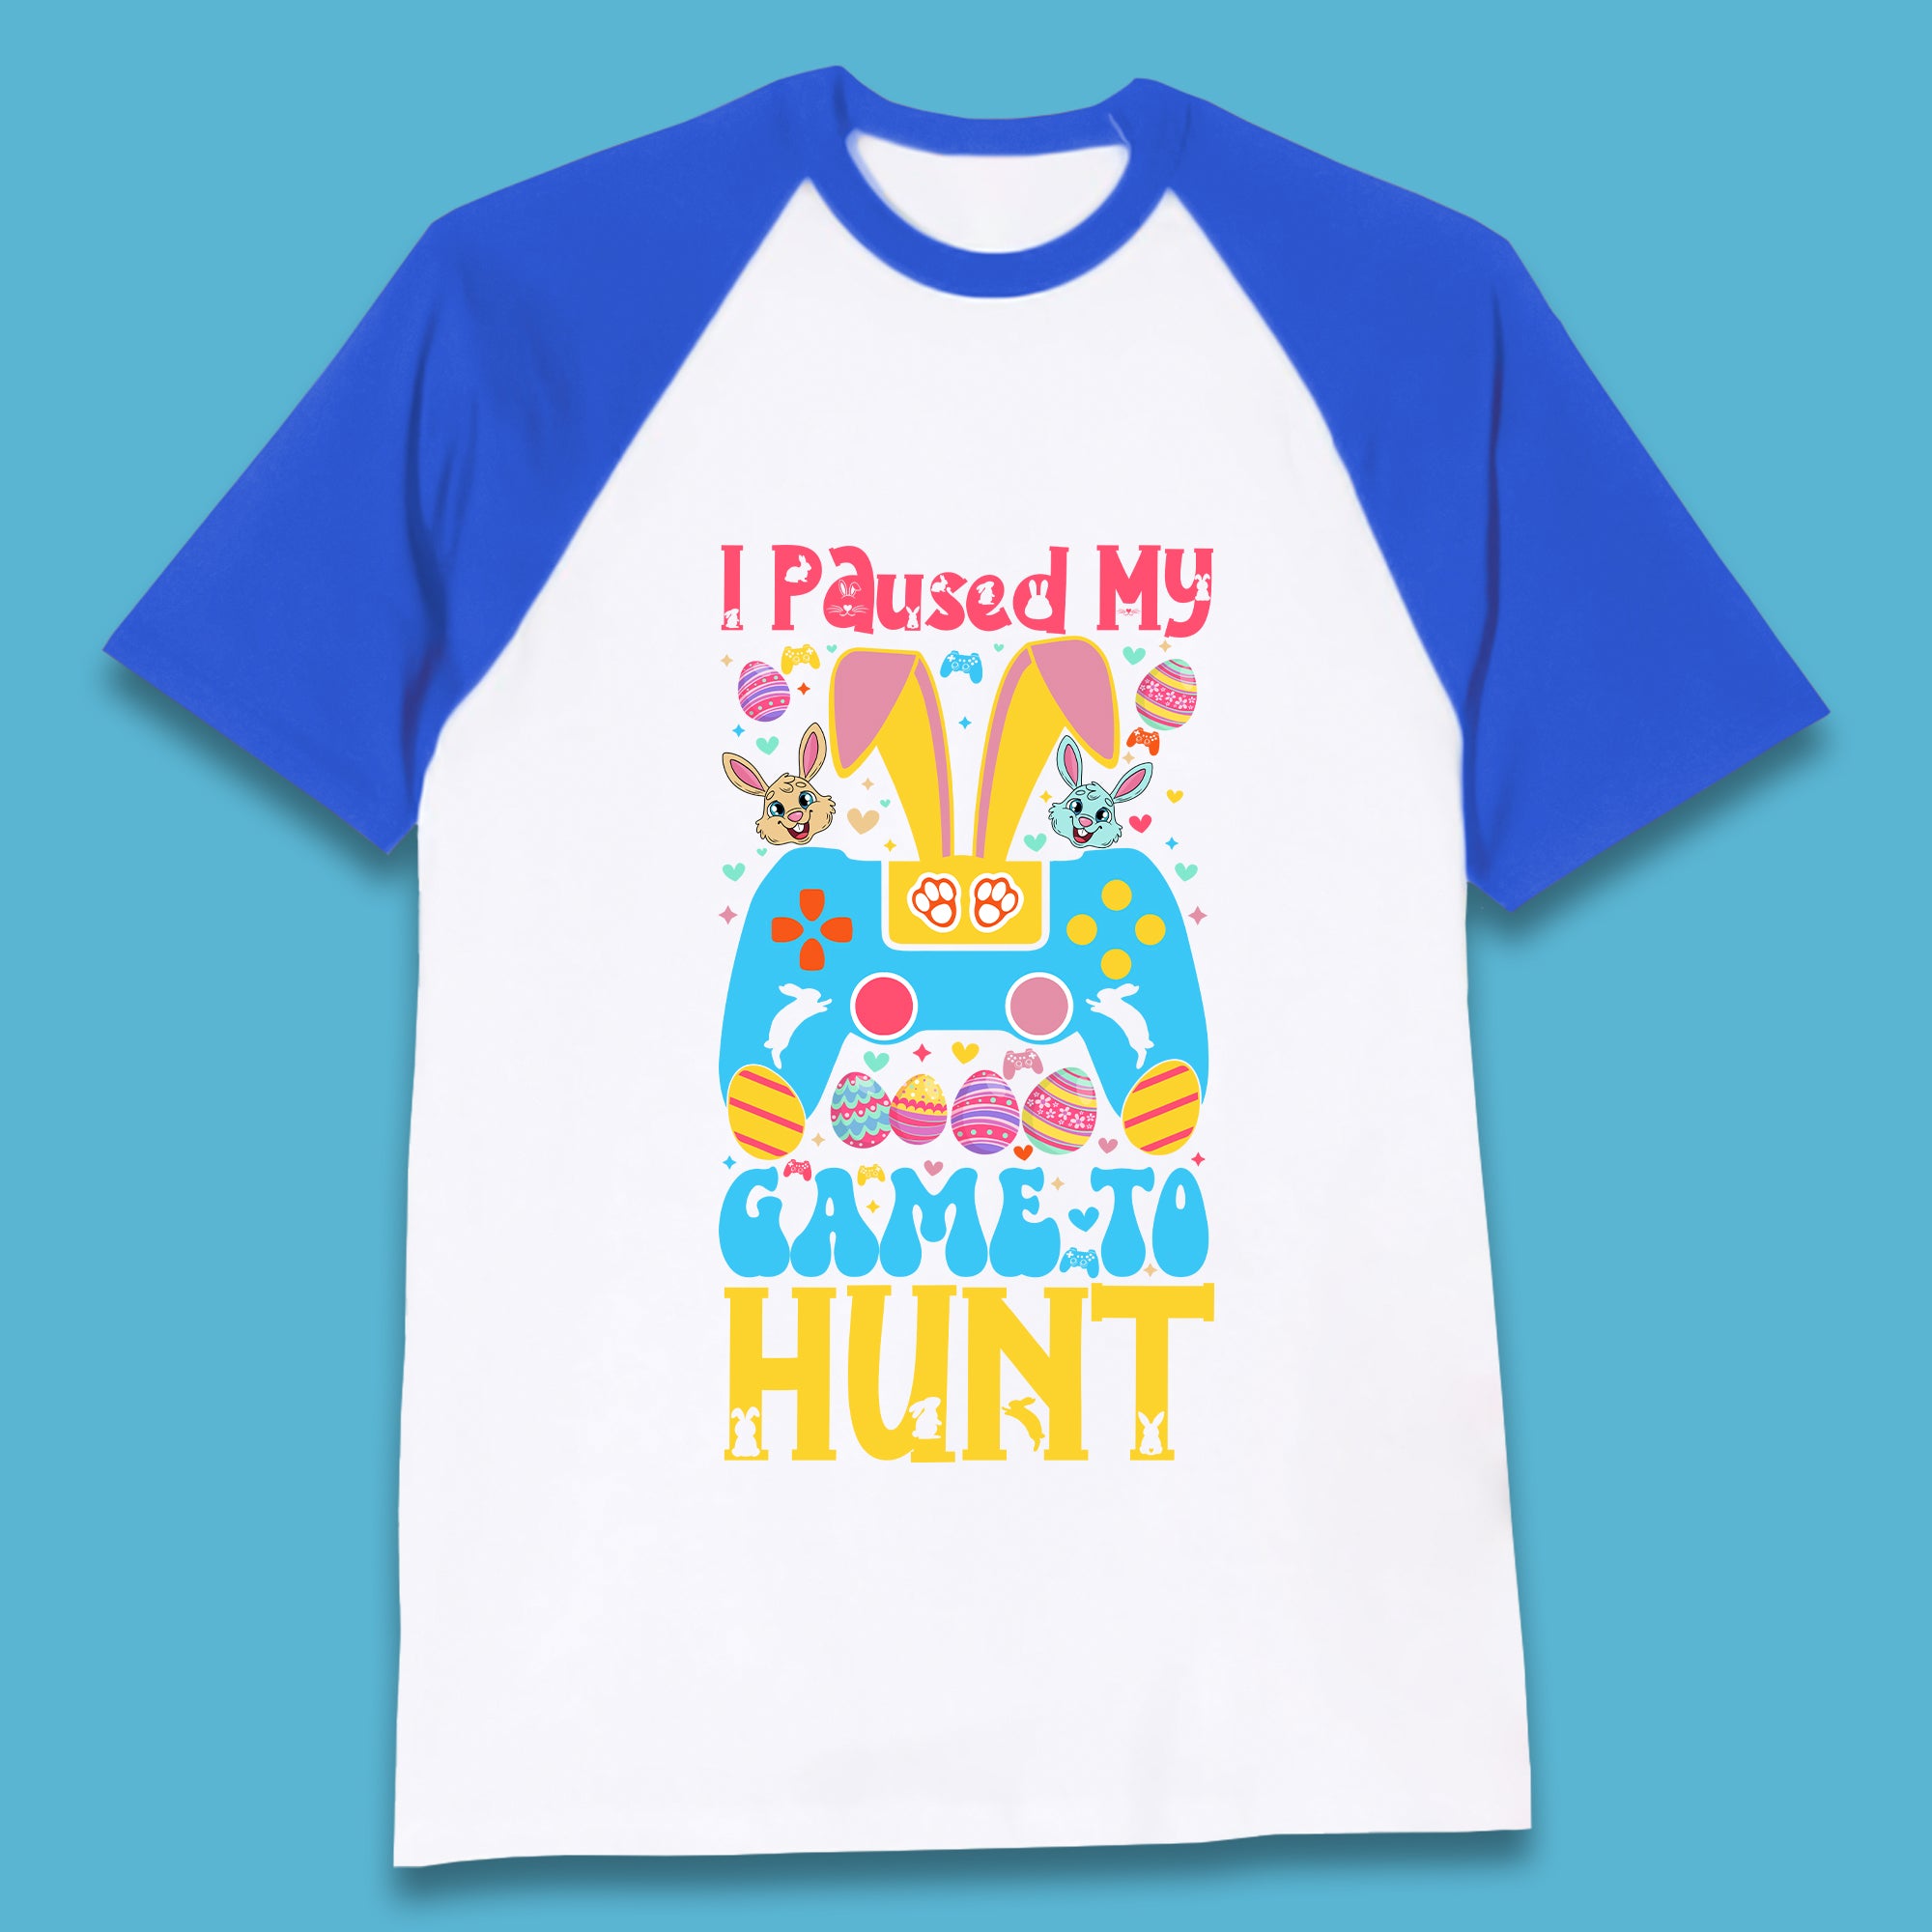 I Paused My Game To Hunt Baseball T-Shirt